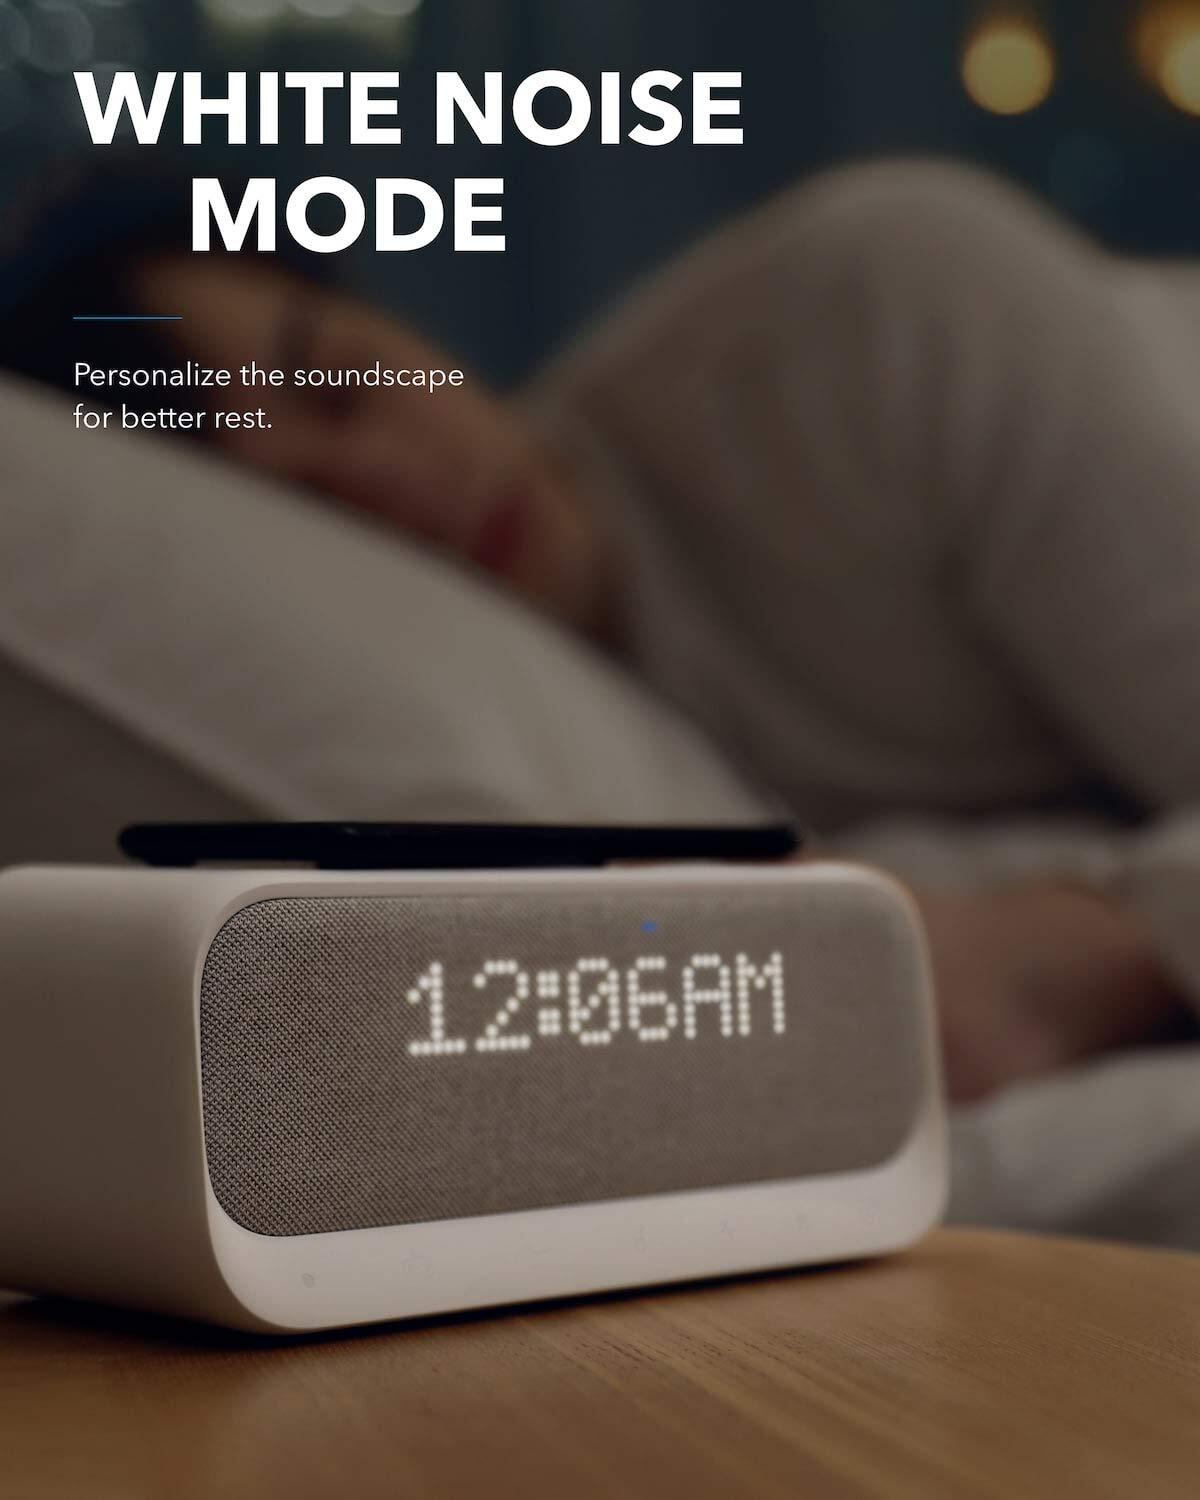 Soundcore Wakey Bluetooth Speakers Powered by Anker with Alarm Clock, Stereo Sound, FM Radio, White Noise, Qi Wireless Charger-M000000000462 www.mysocially.com